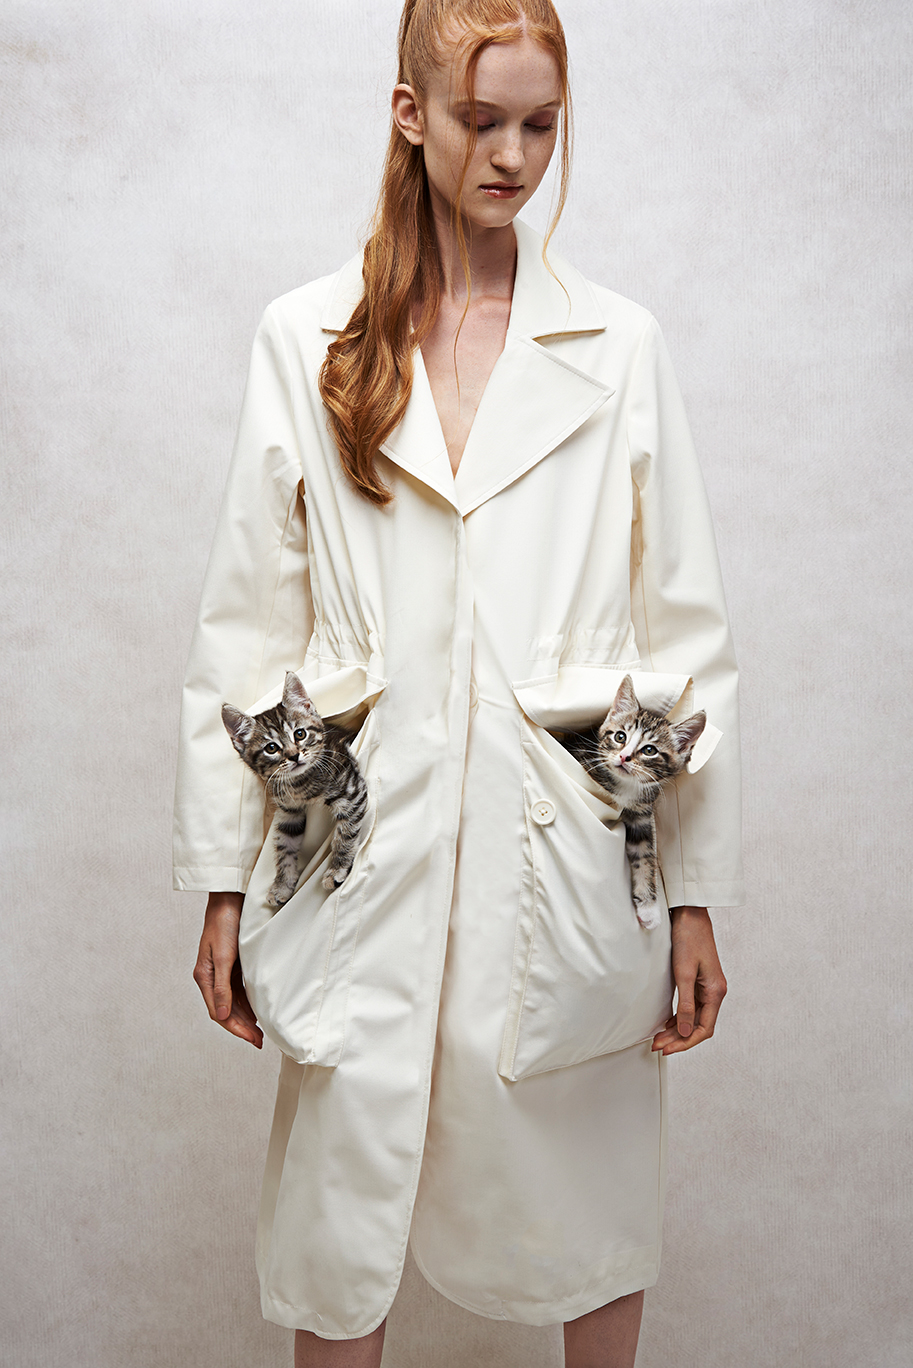 Model on a grey textured background wearing a jacket with two kittens in her pockets.